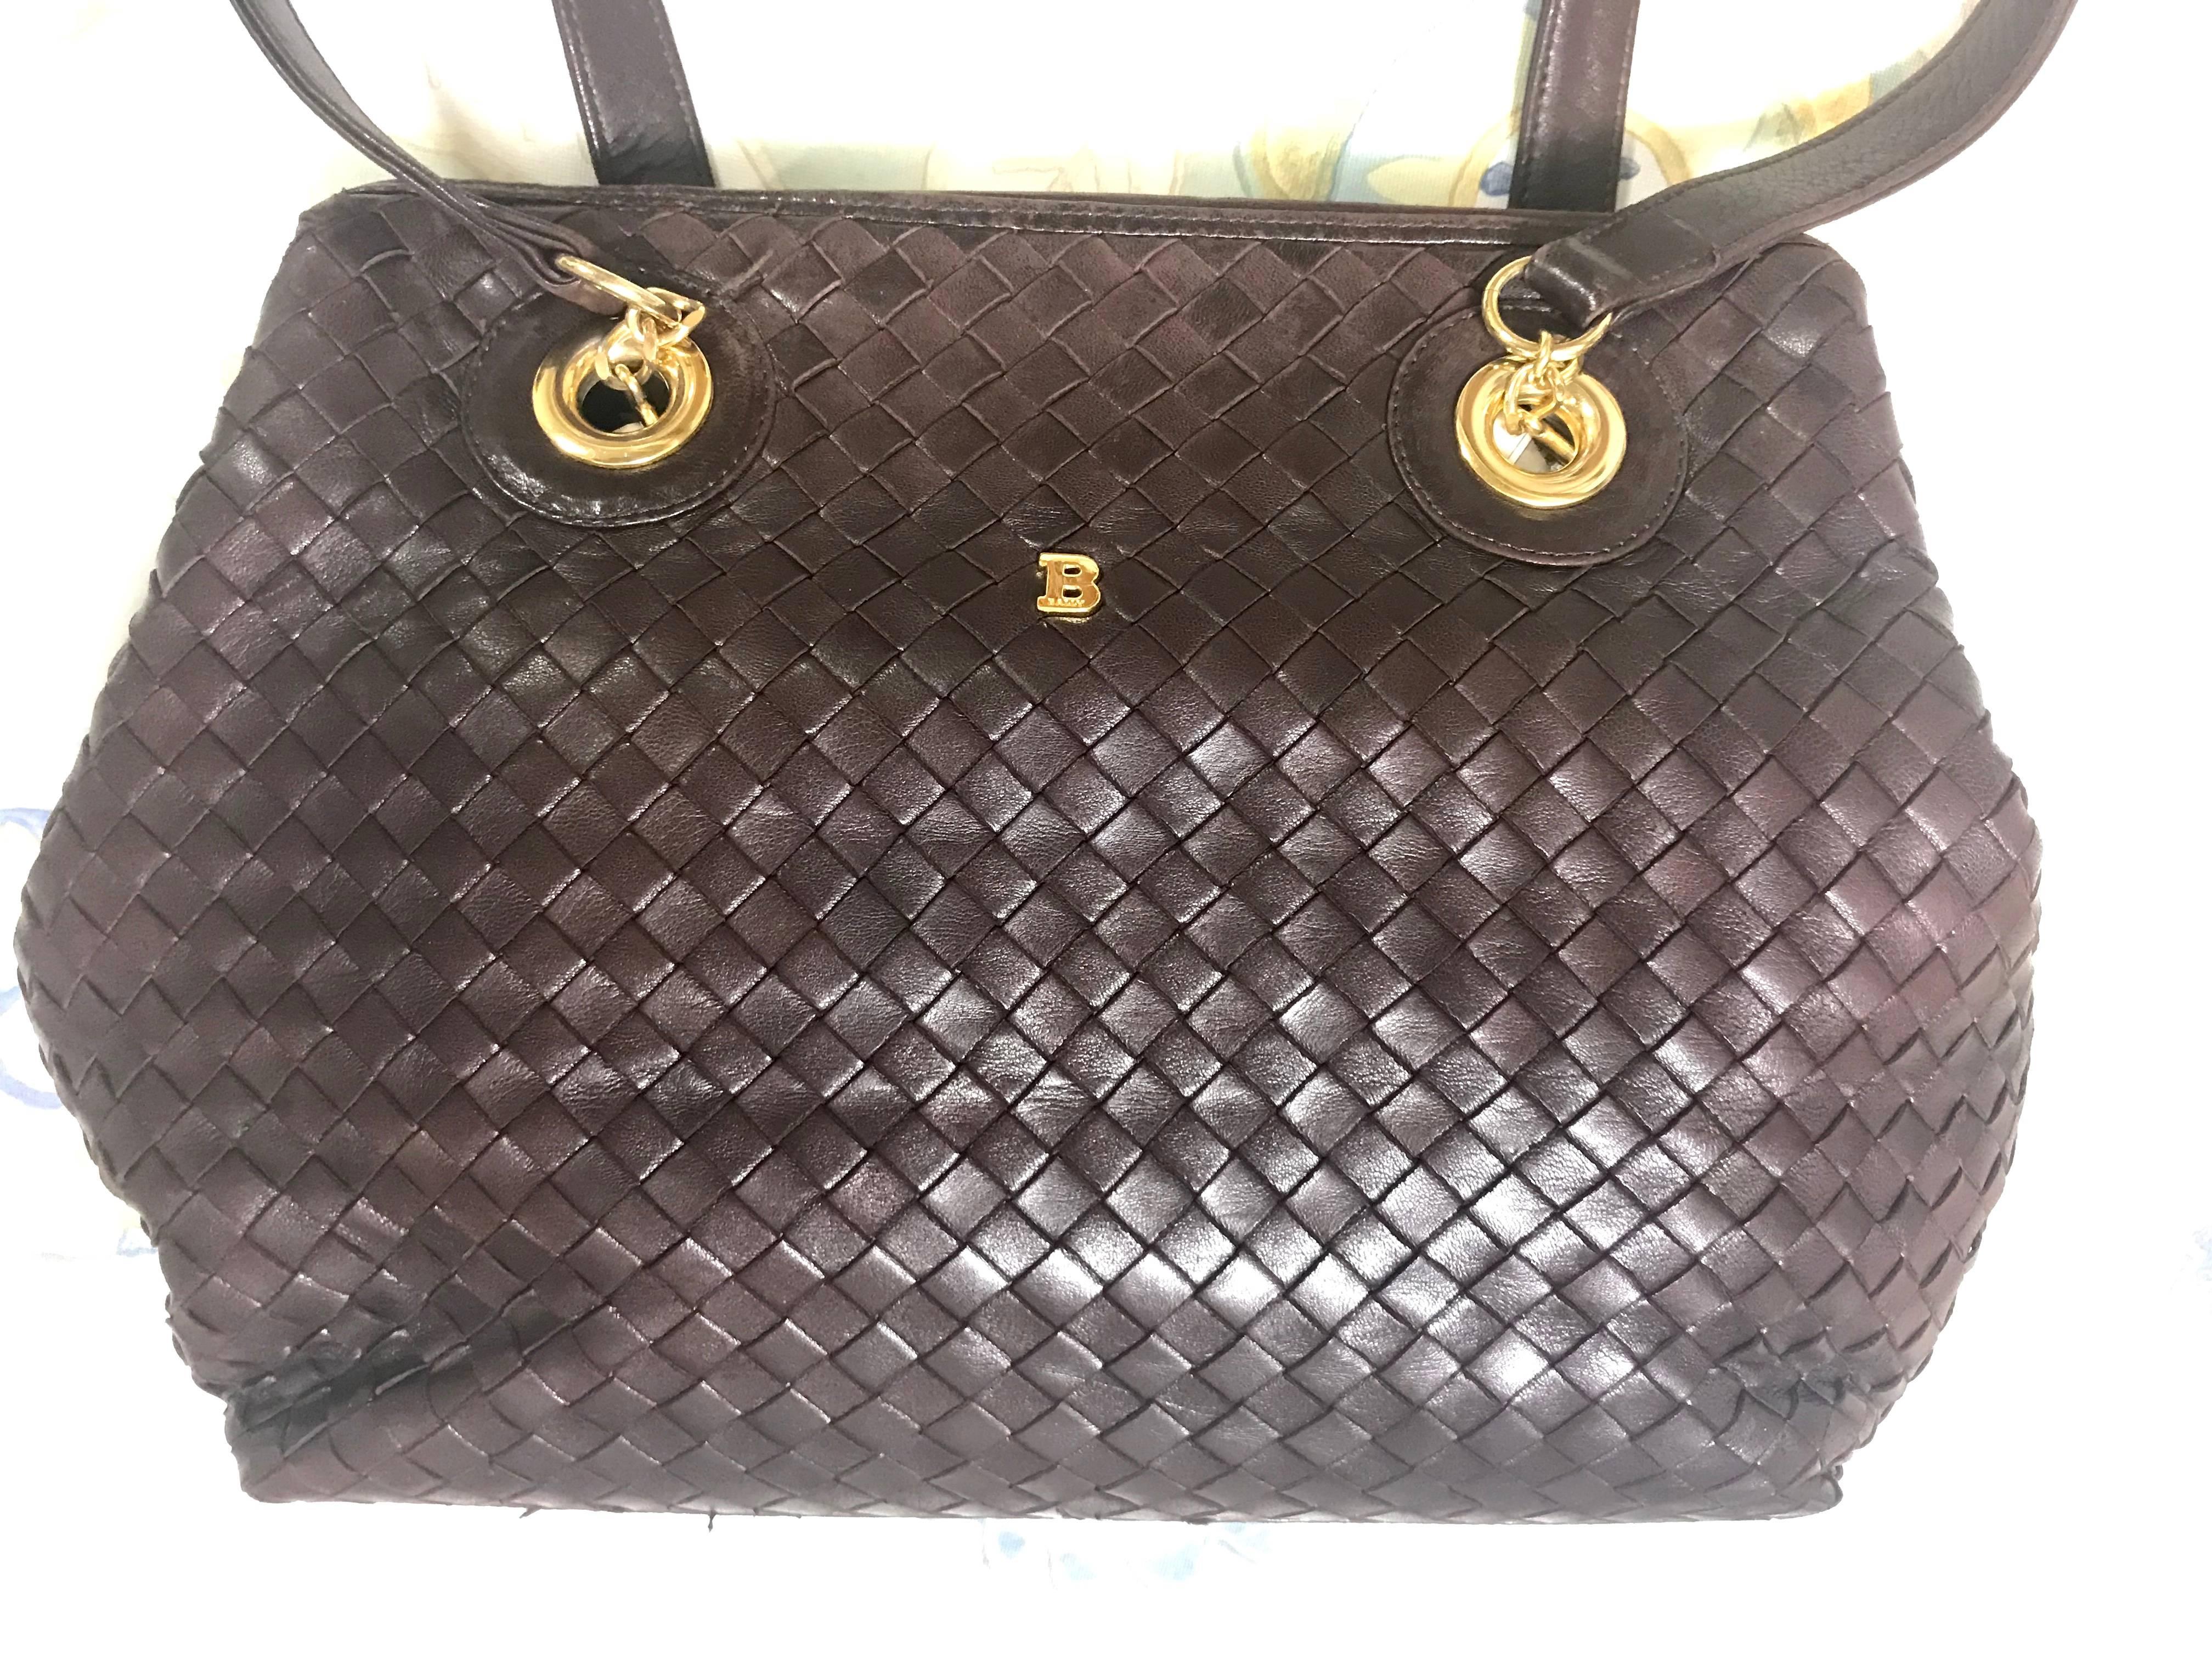 1990s. Vintage Bally dark brown lamb leather woven, intrecciato style shoulder bag with golden B logo motif. Classic purse.

Vintage Bally dark brown lamb leather woven, intrecciato style handbag with golden B logo motif.

Here is another Bally